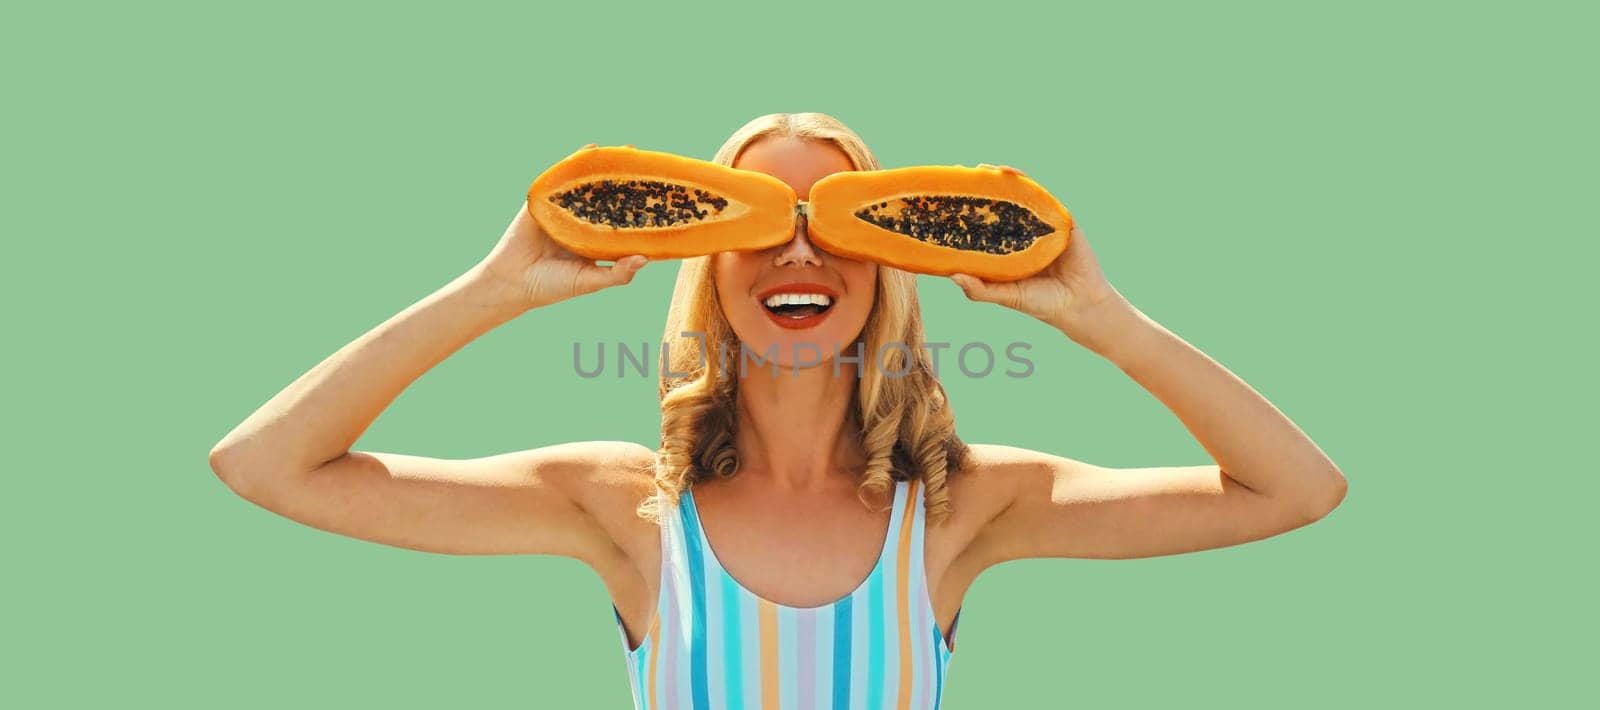 Summer portrait of happy cheerful laughing young woman posing with papaya fruit on green background by Rohappy